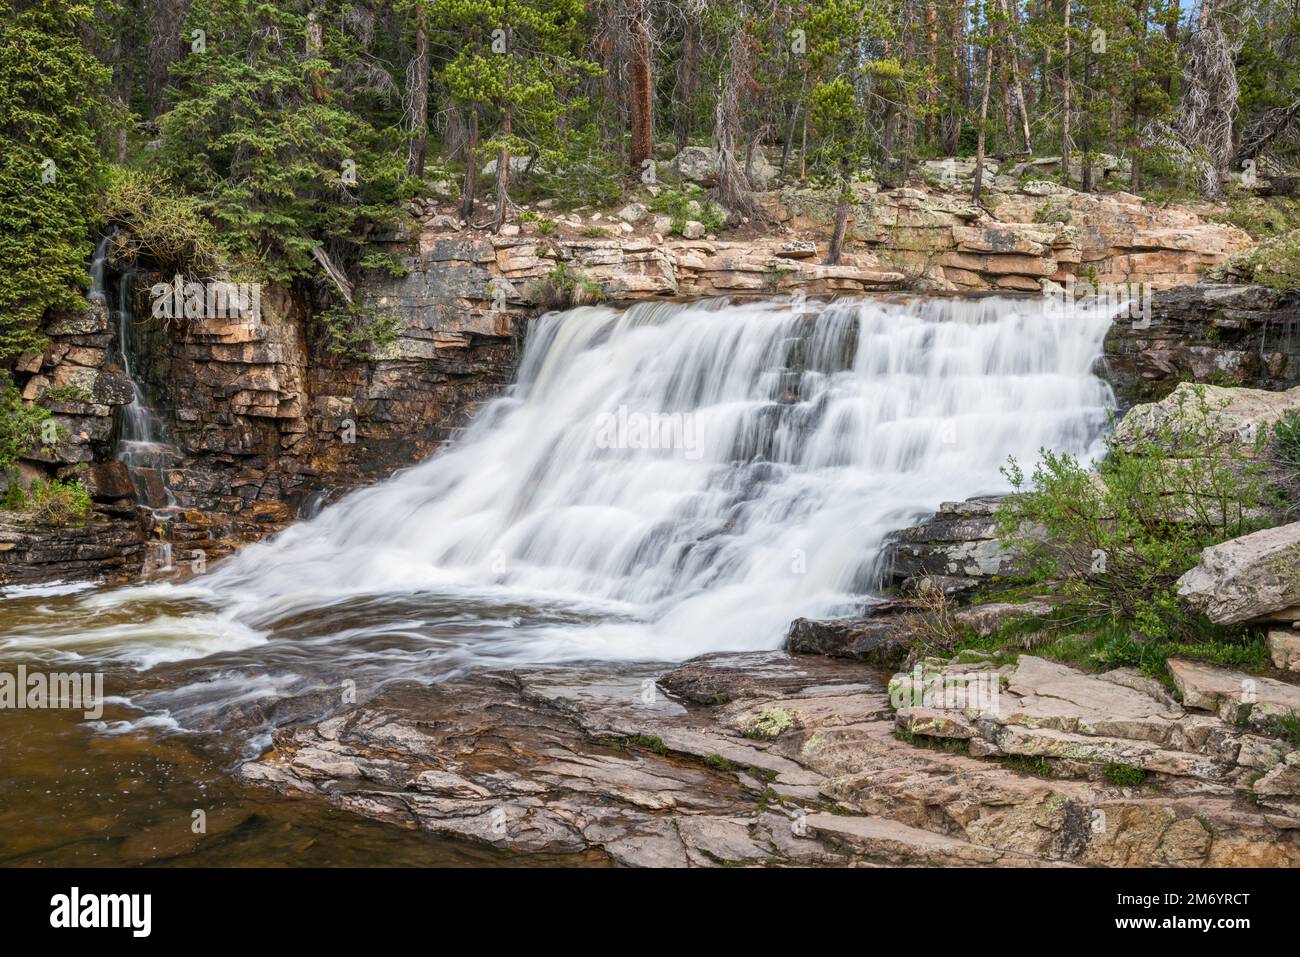 Provo River Falls, Mirror Lake Scenic Byway, Uinta Mountains, Uinta Wasatch cache National Forest, Utah, USA Foto Stock